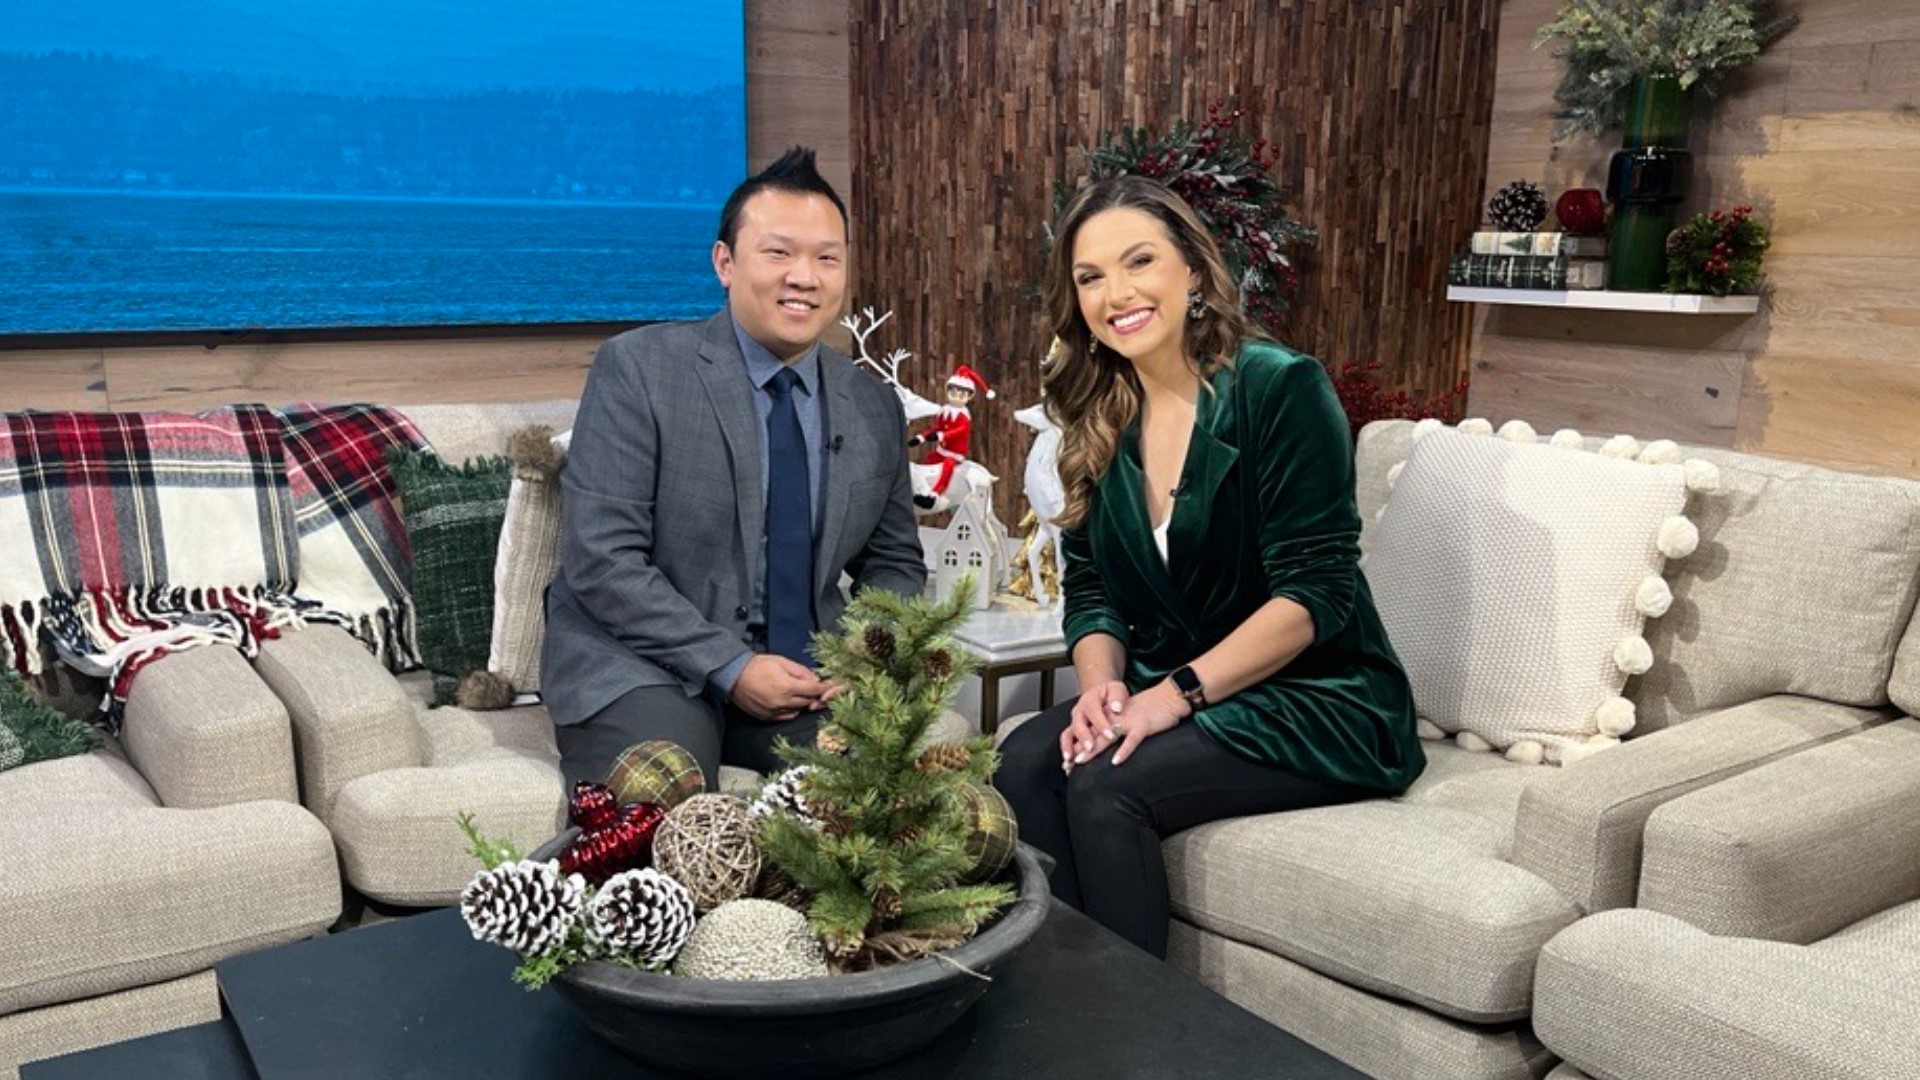 Dr. Jason Poon from the EvergreenHealth Multiple Sclerosis Center explains who is at risk for MS as well as symptoms and treatment. Sponsored by EvergreenHealth.